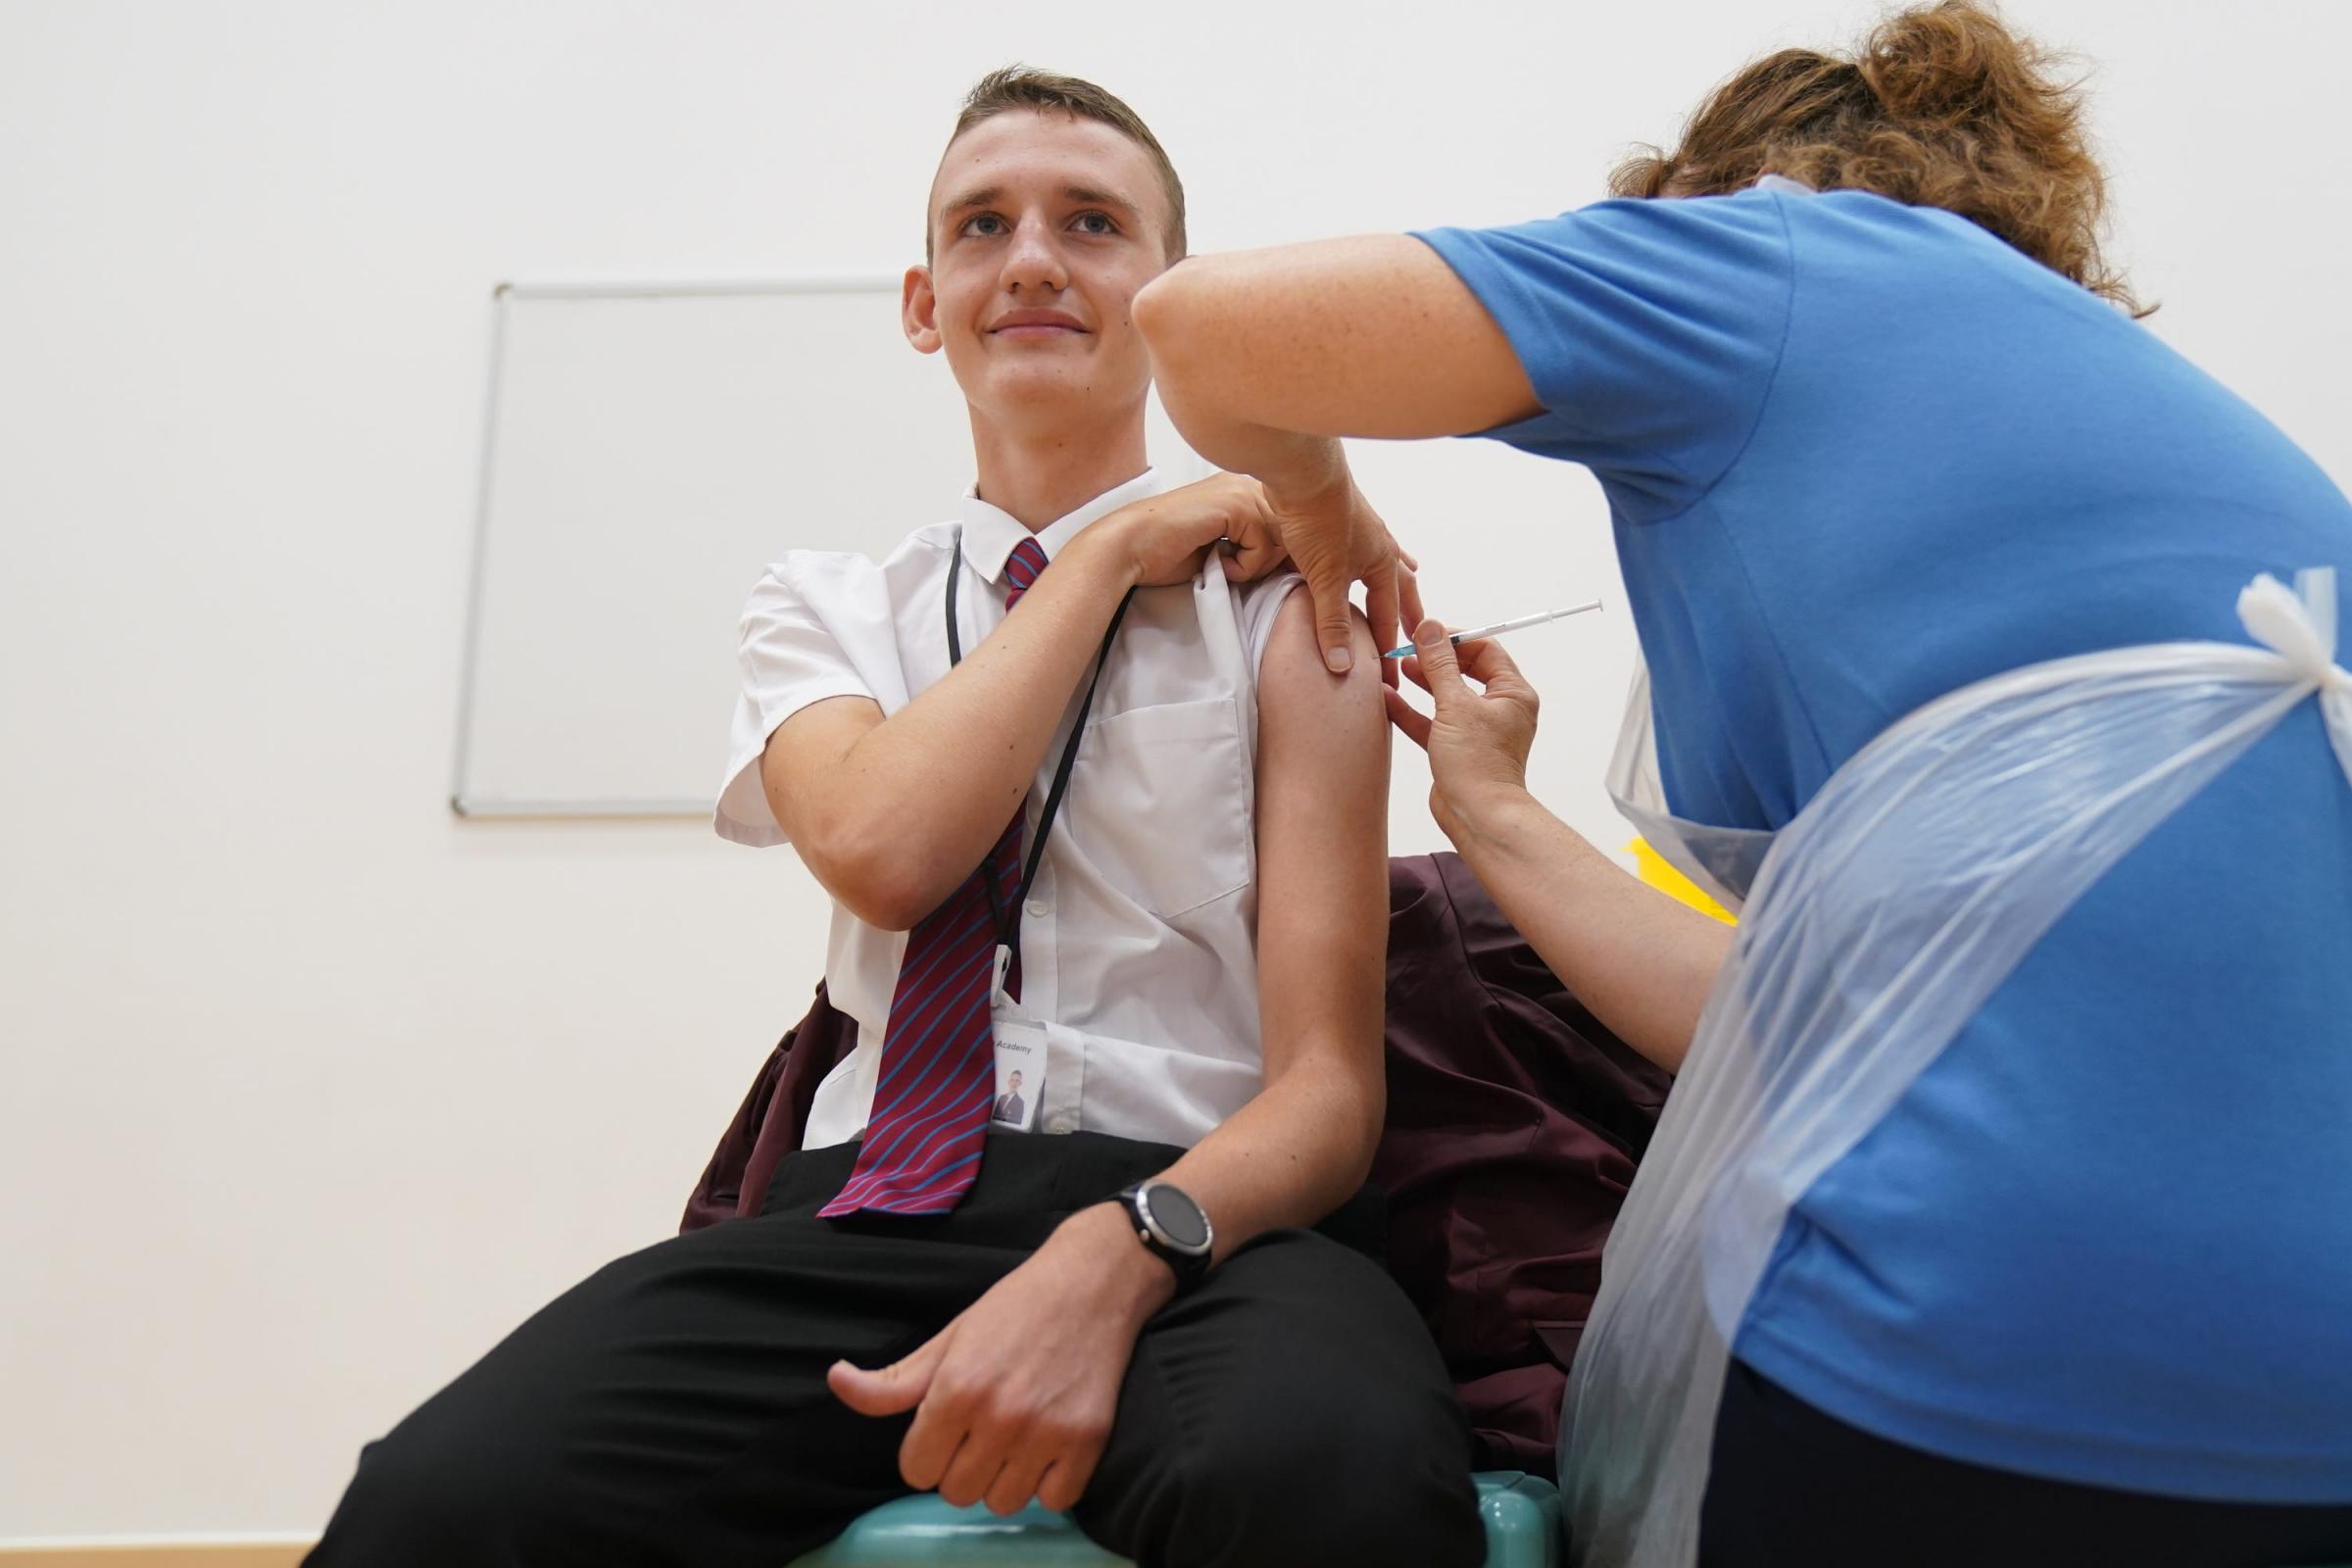 Covid Scotland: Half of 12 to 15 years old receive the first dose of the vaccine